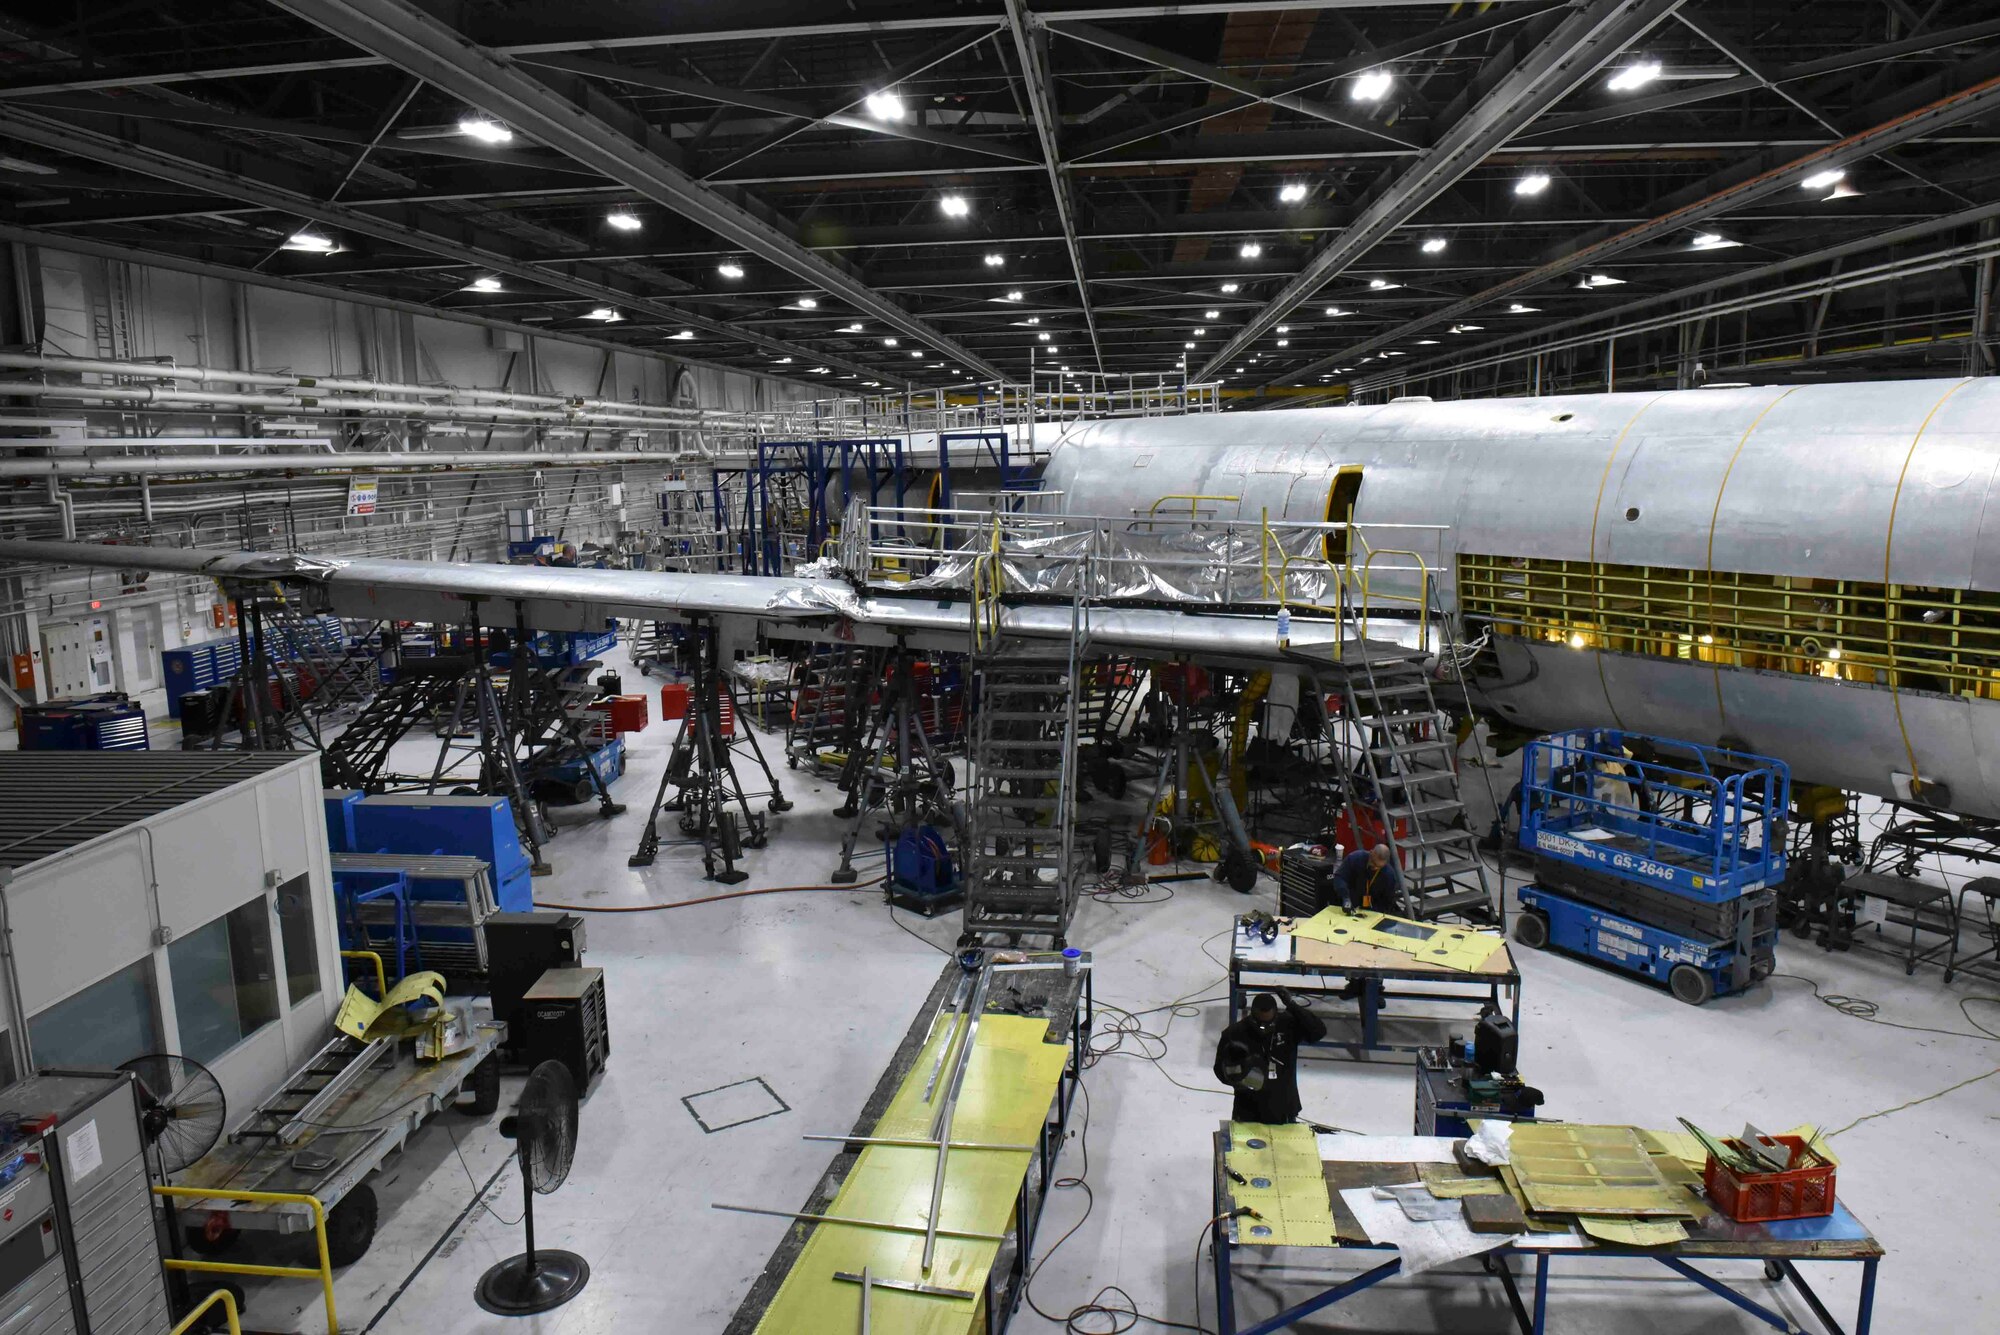 A KC-135 Stratotanker undergoes programmed depot maintenance at the Oklahoma City Air Logistics Complex at Tinker Air Force Base, Oklahoma, Nov. 23, 2019. During PDM, each KC-135 undergoes a series of inspections, upgrades to the aircraft, and a flight test to ensure proper functionality. (U.S. Air Force photo by Airman Kiaundra Miller)